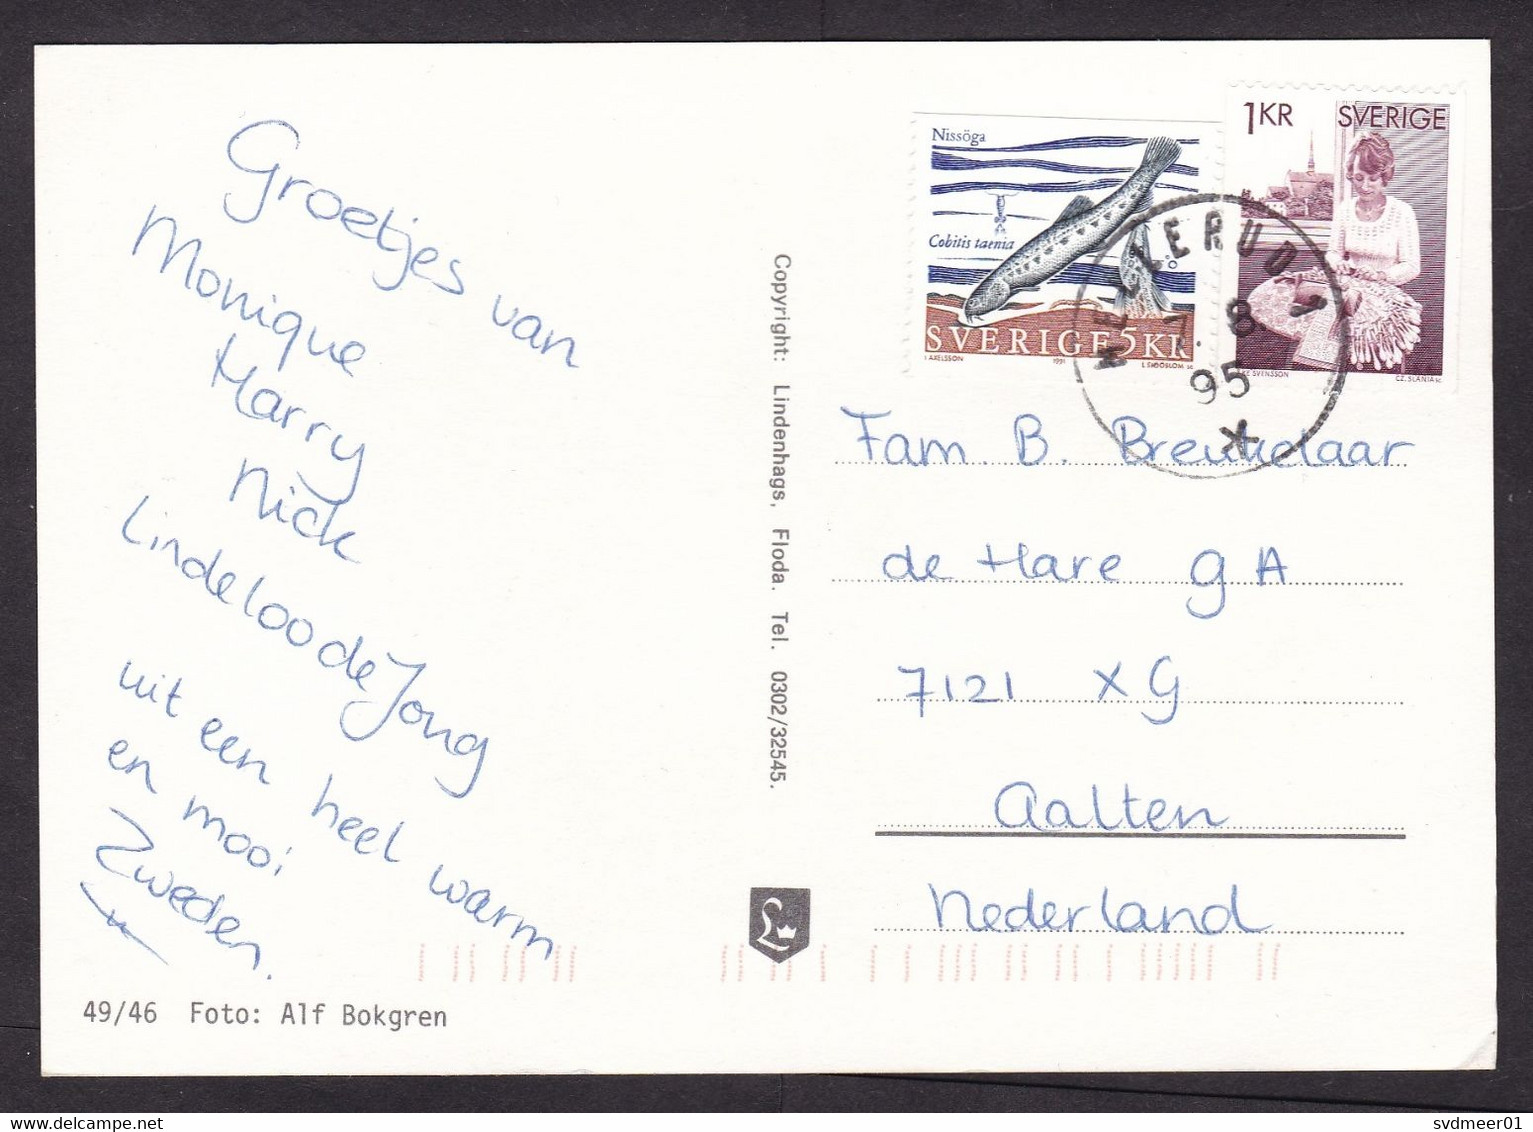 Sweden: Picture Postcard To Netherlands, 1995, 2 Stamps, Fish, Lady, Card: Dalsland (traces Of Use) - Lettres & Documents